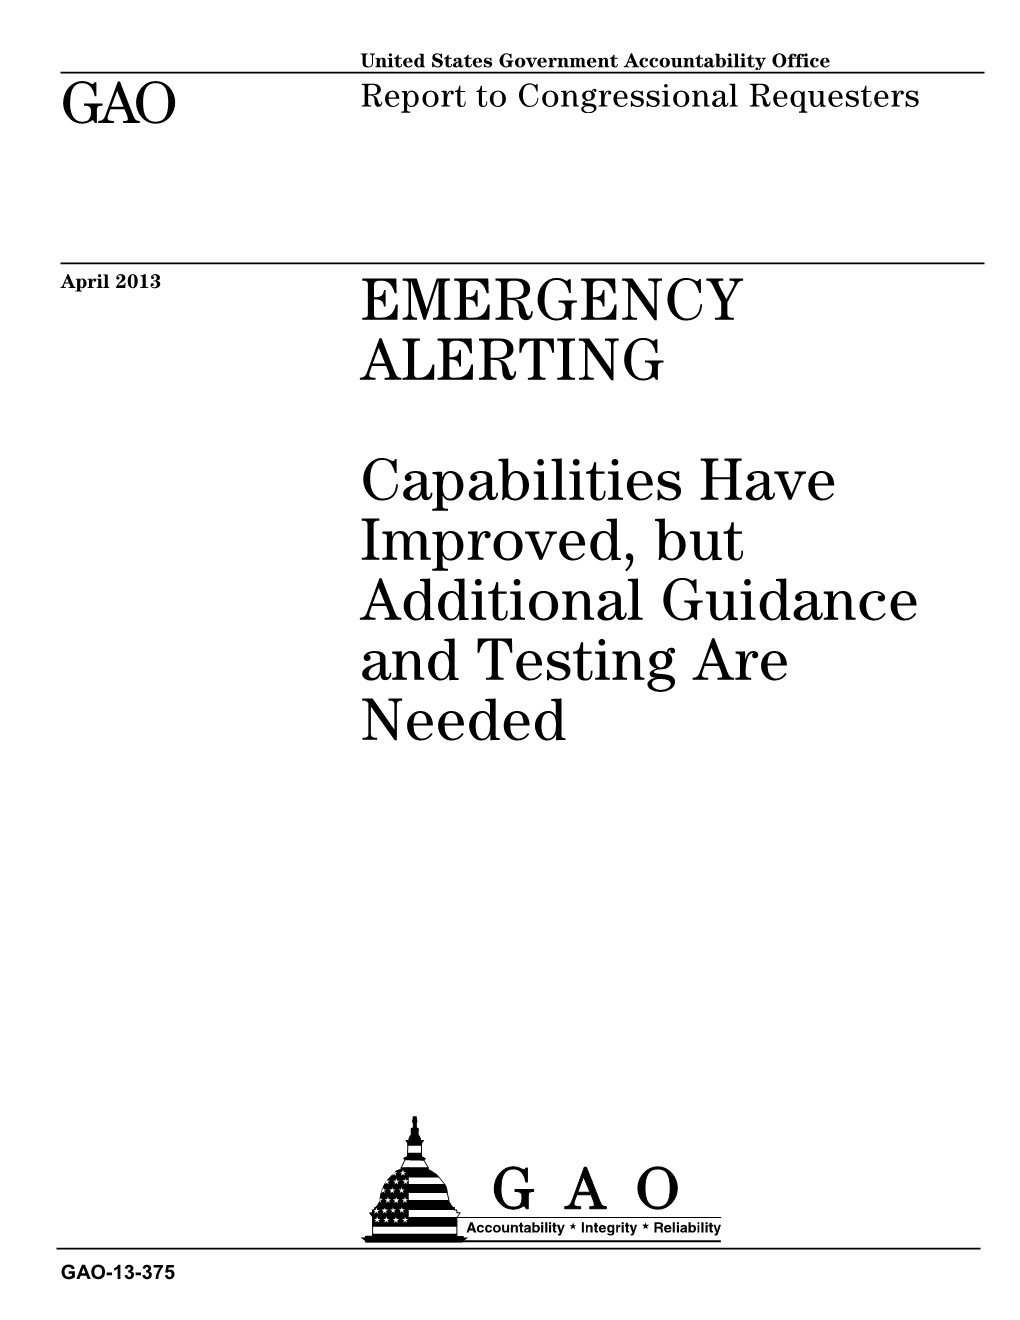 GAO-13-375, EMERGENCY ALERTING: Capabilities Have Improved, but Additional Guidance and Testing Are Needed